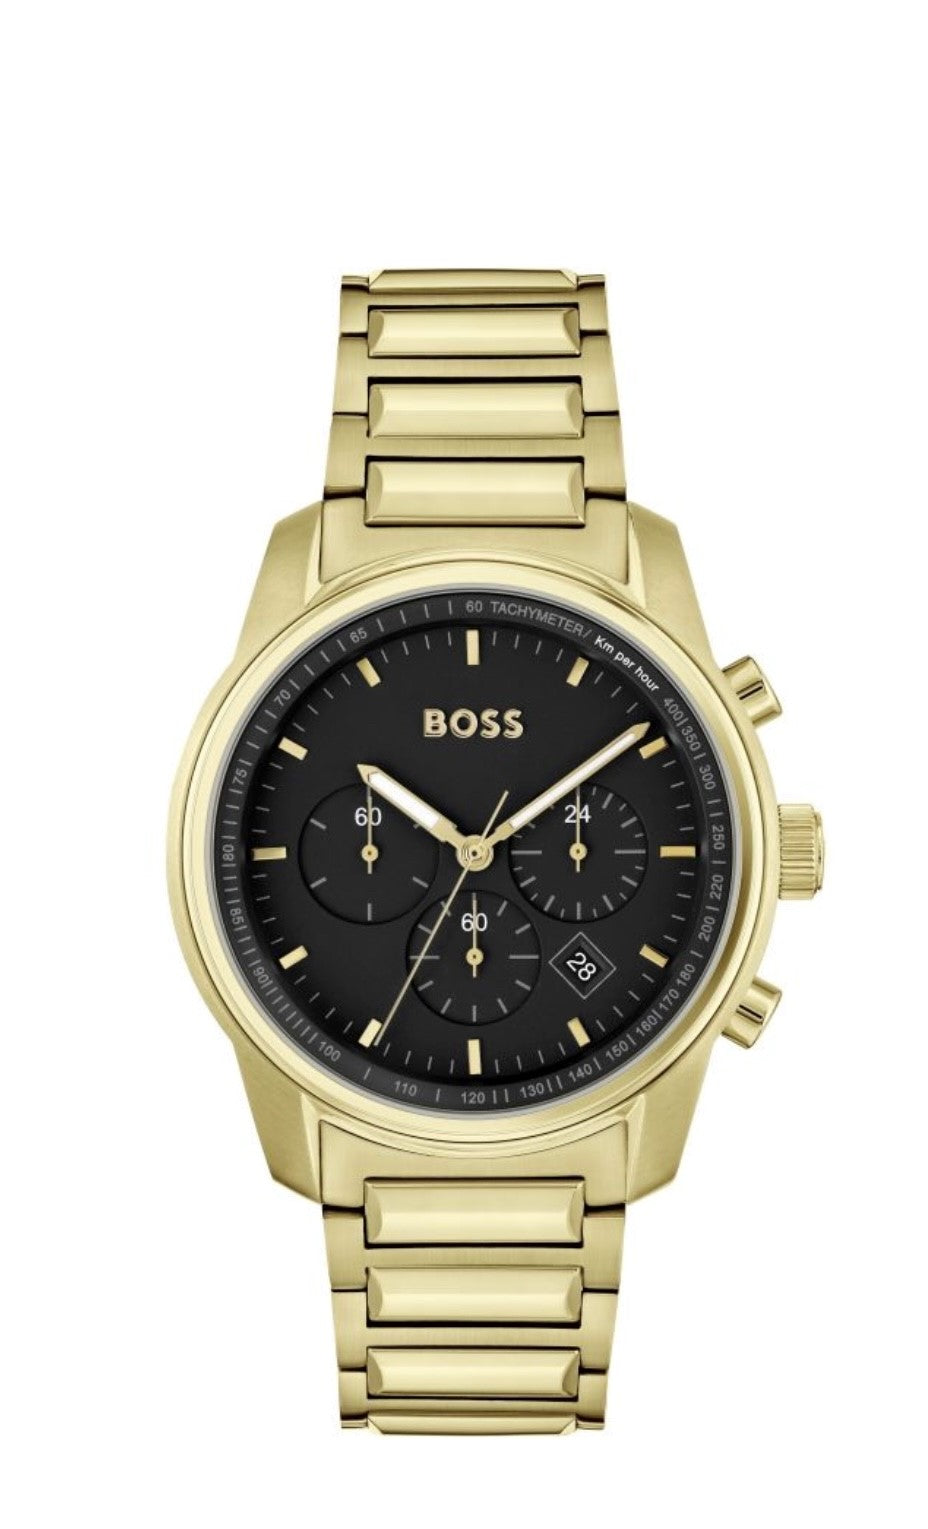 Gents Hugo Boss Watch Stainless Steel Gold Tone Strap, Black Dial, Gold Tone Accents SKU 4012145